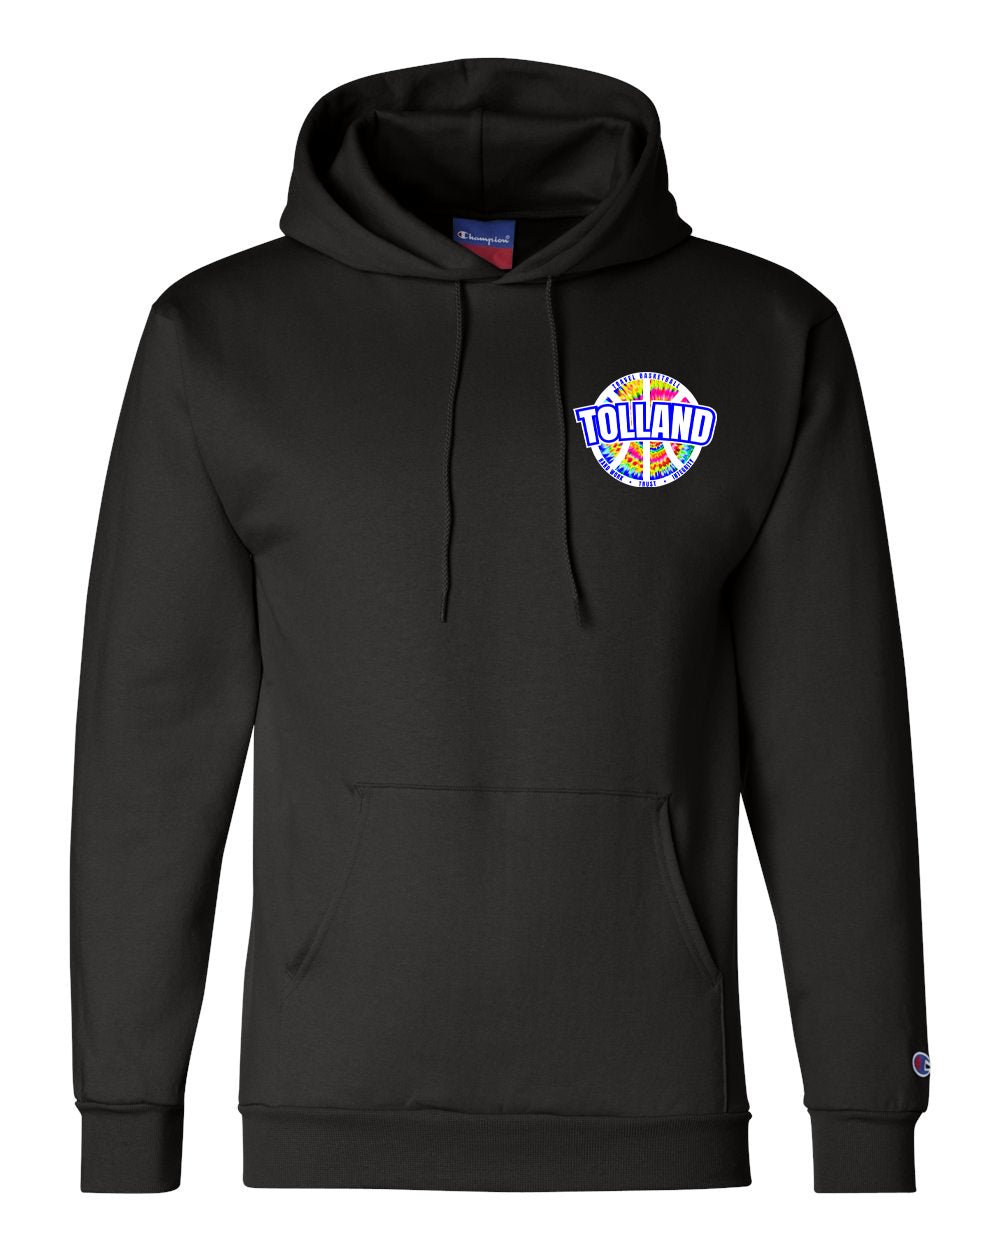 Tolland TB Adult Champion Hoodie "Tye Dye Corner" - S700 (color options available)